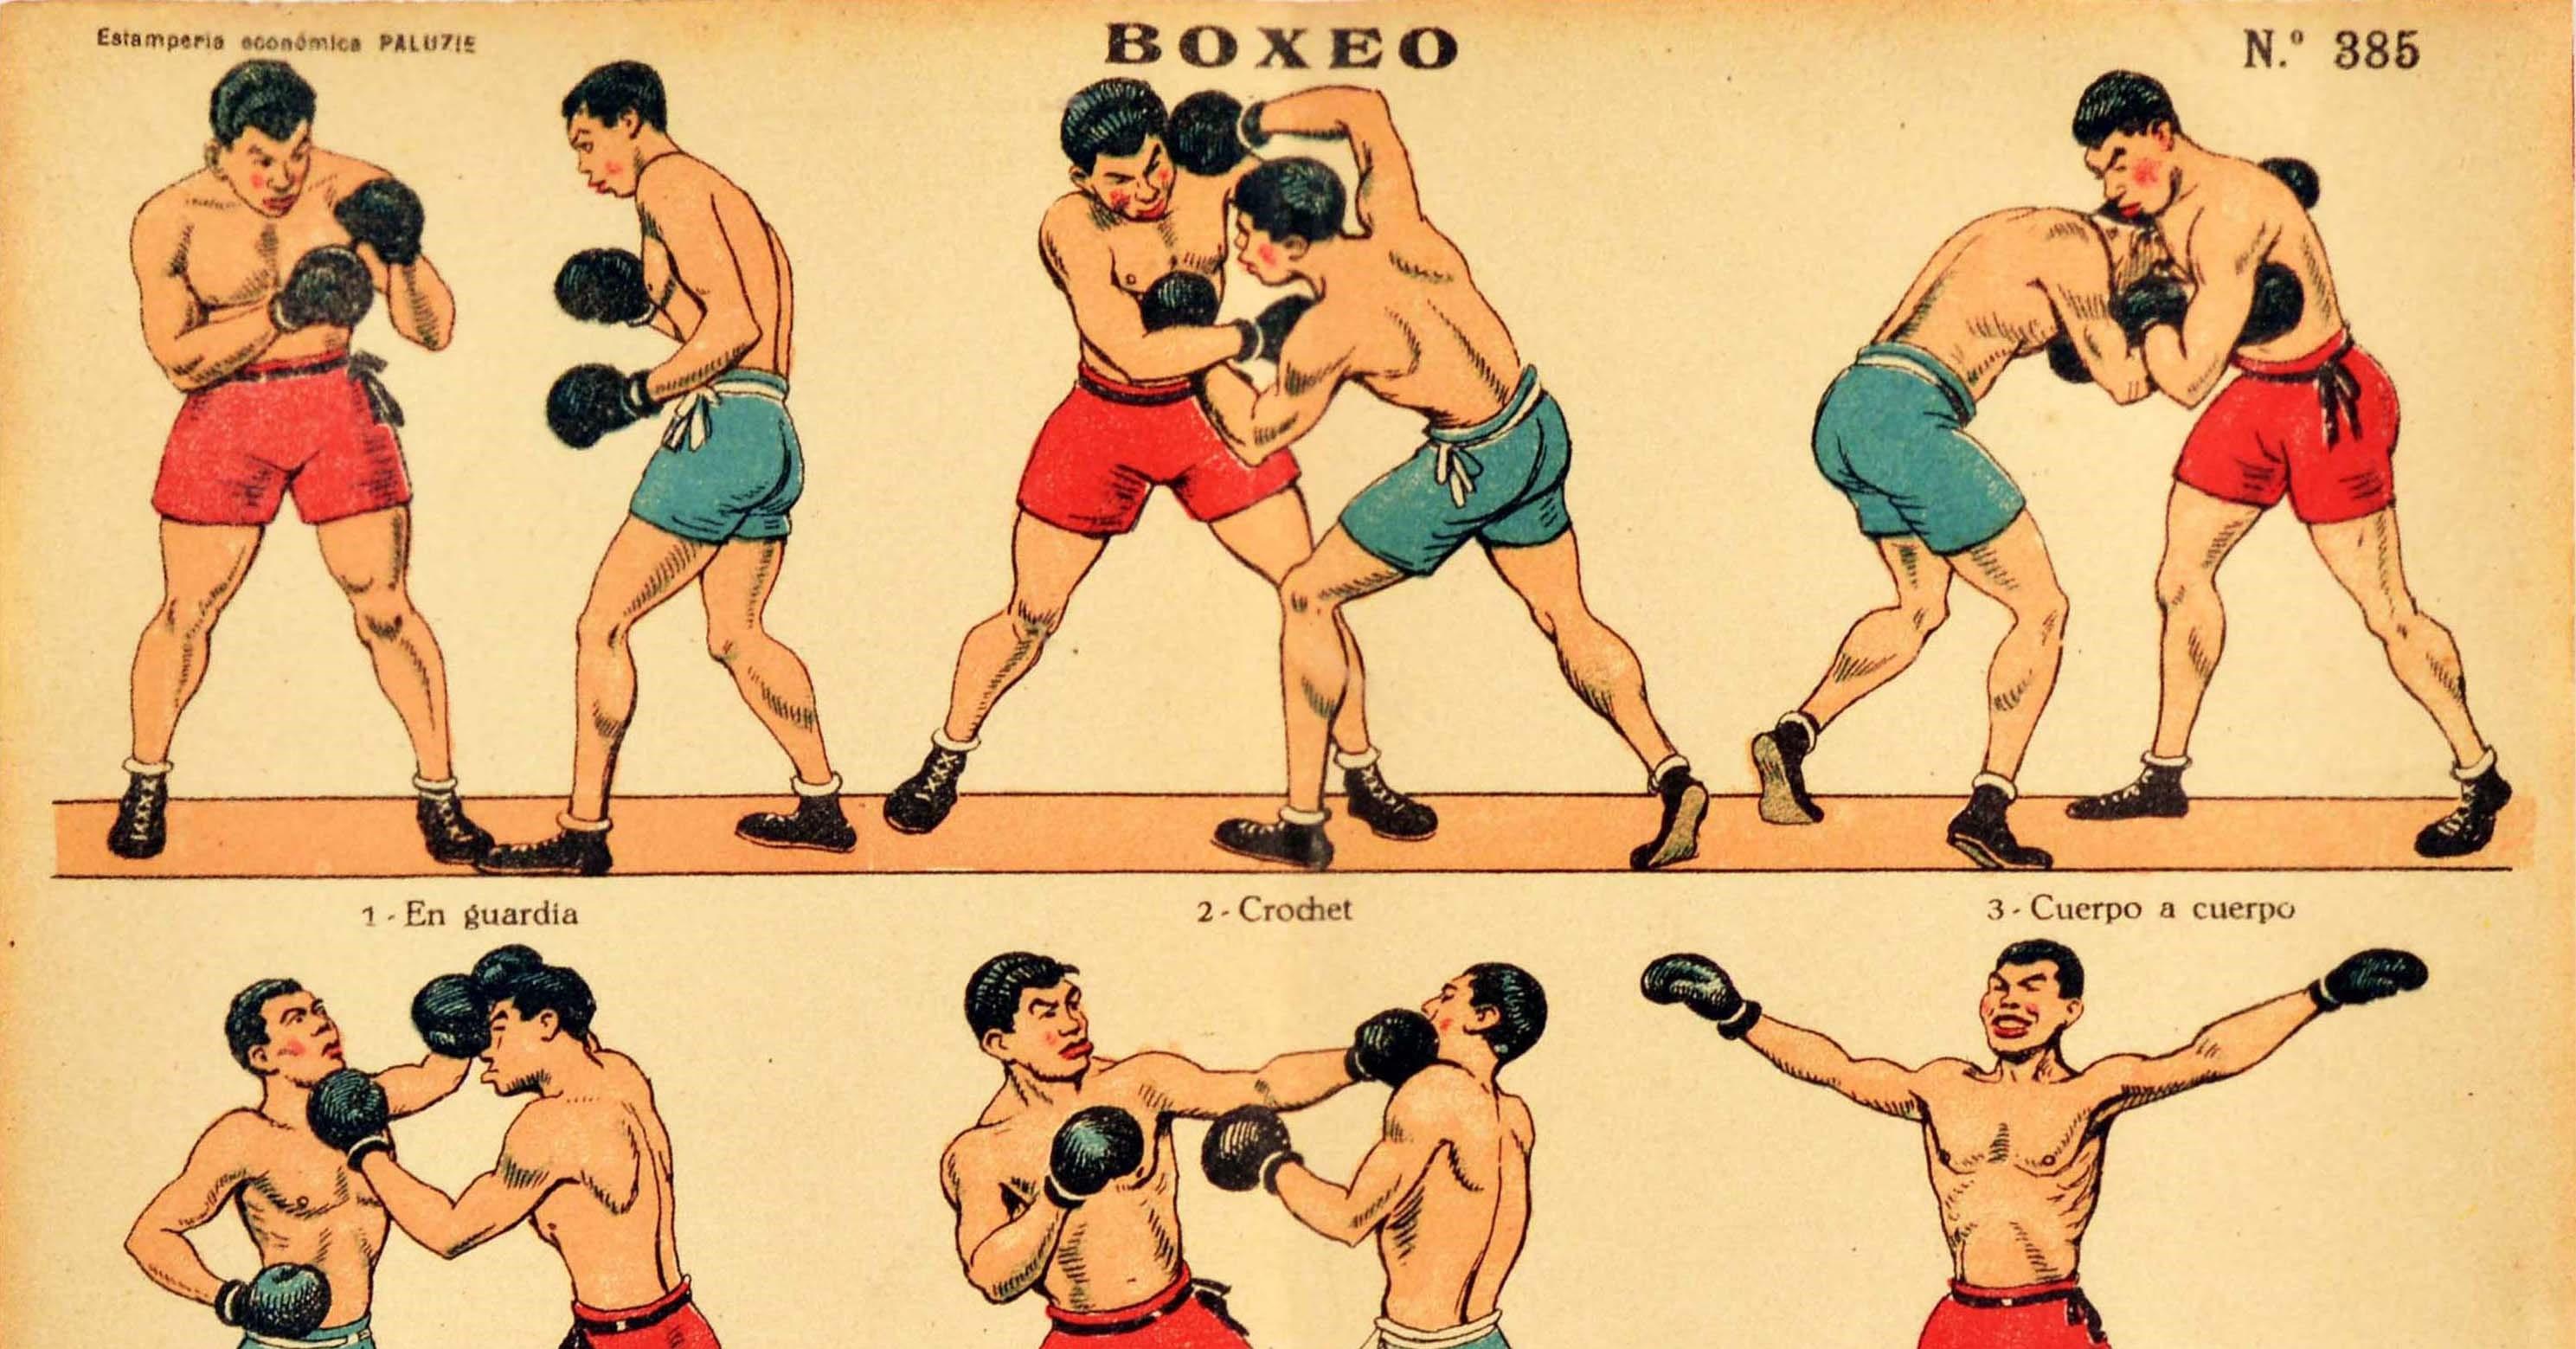 Original antique sports poster - Boxeo / Boxing - featuring images of two boxers fighting each other using various moves with description headings below showing the different stances and punches in a boxing match and in training including On guard